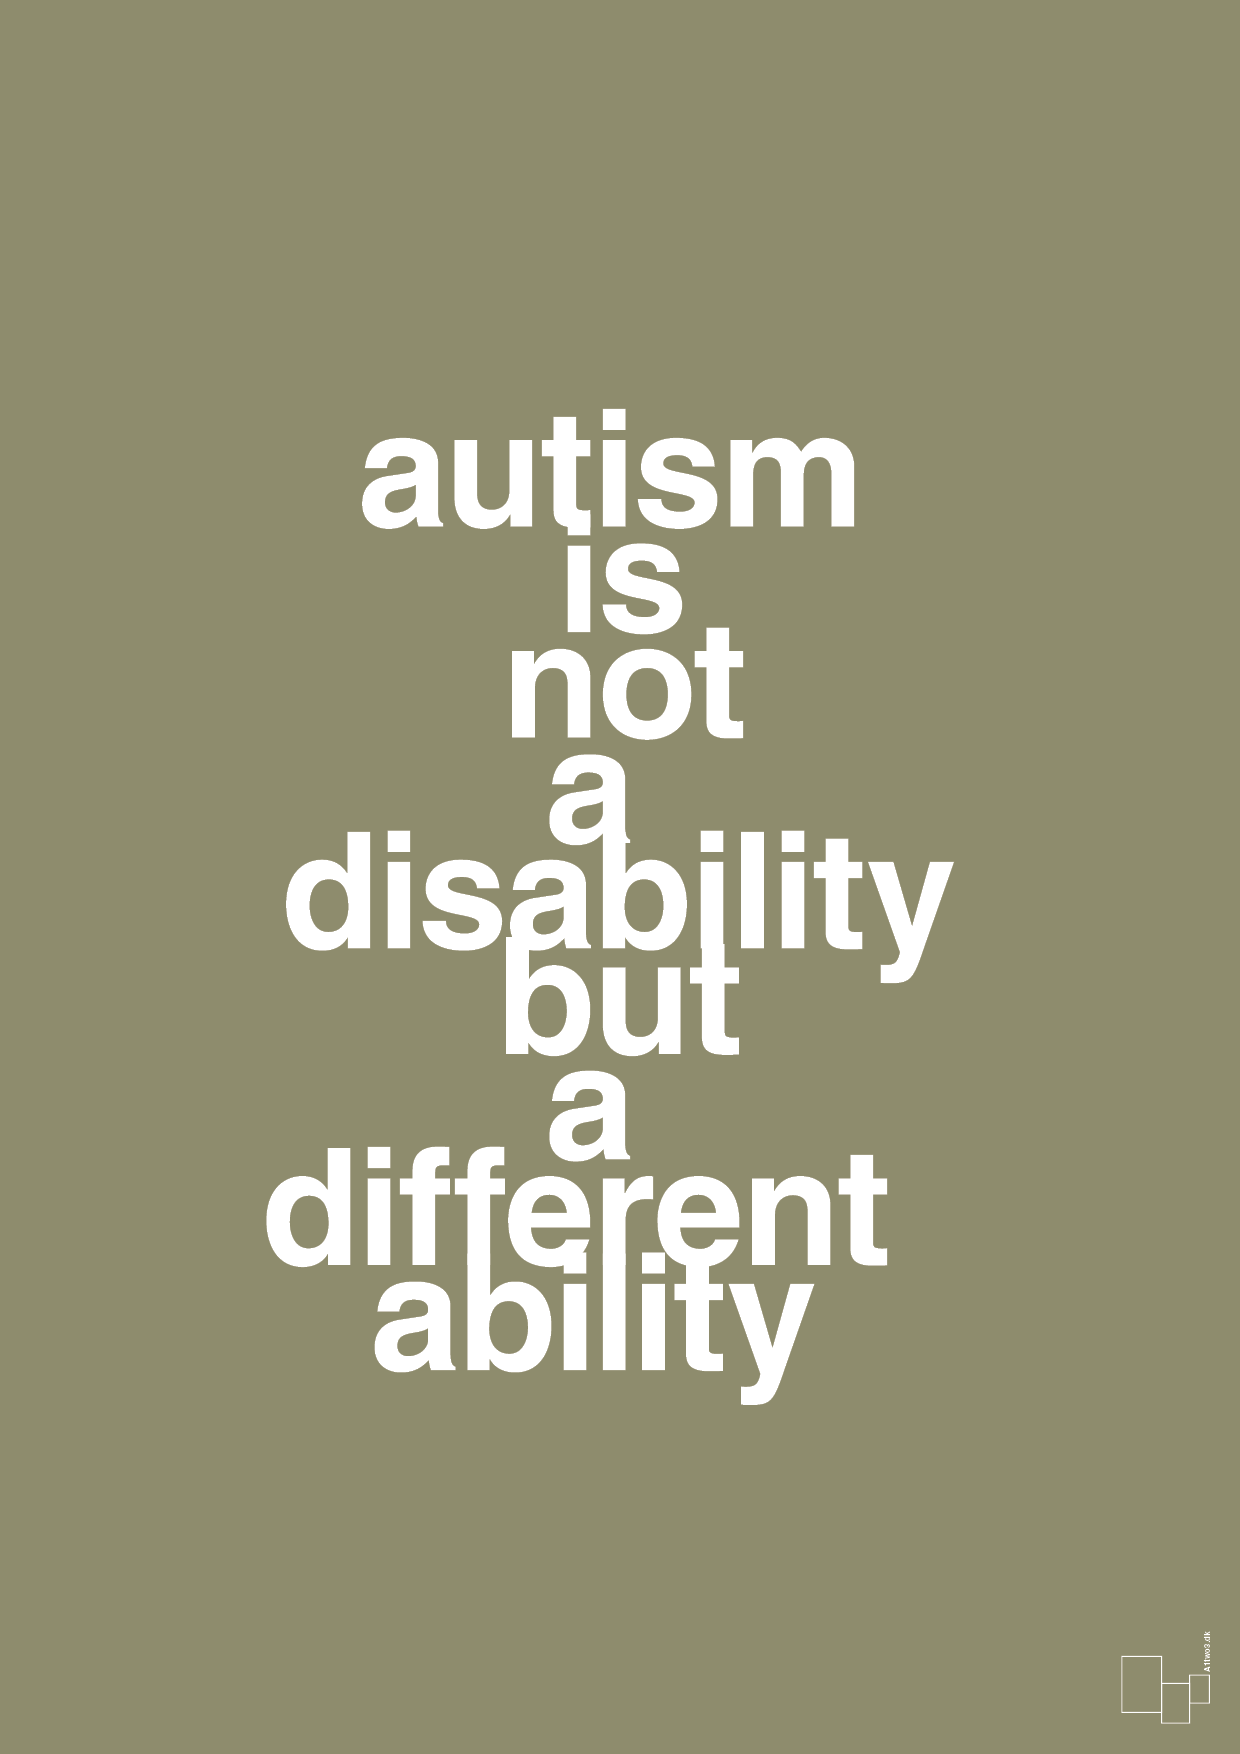 autism is not a disability but a different ability - Plakat med Samfund i Misty Forrest